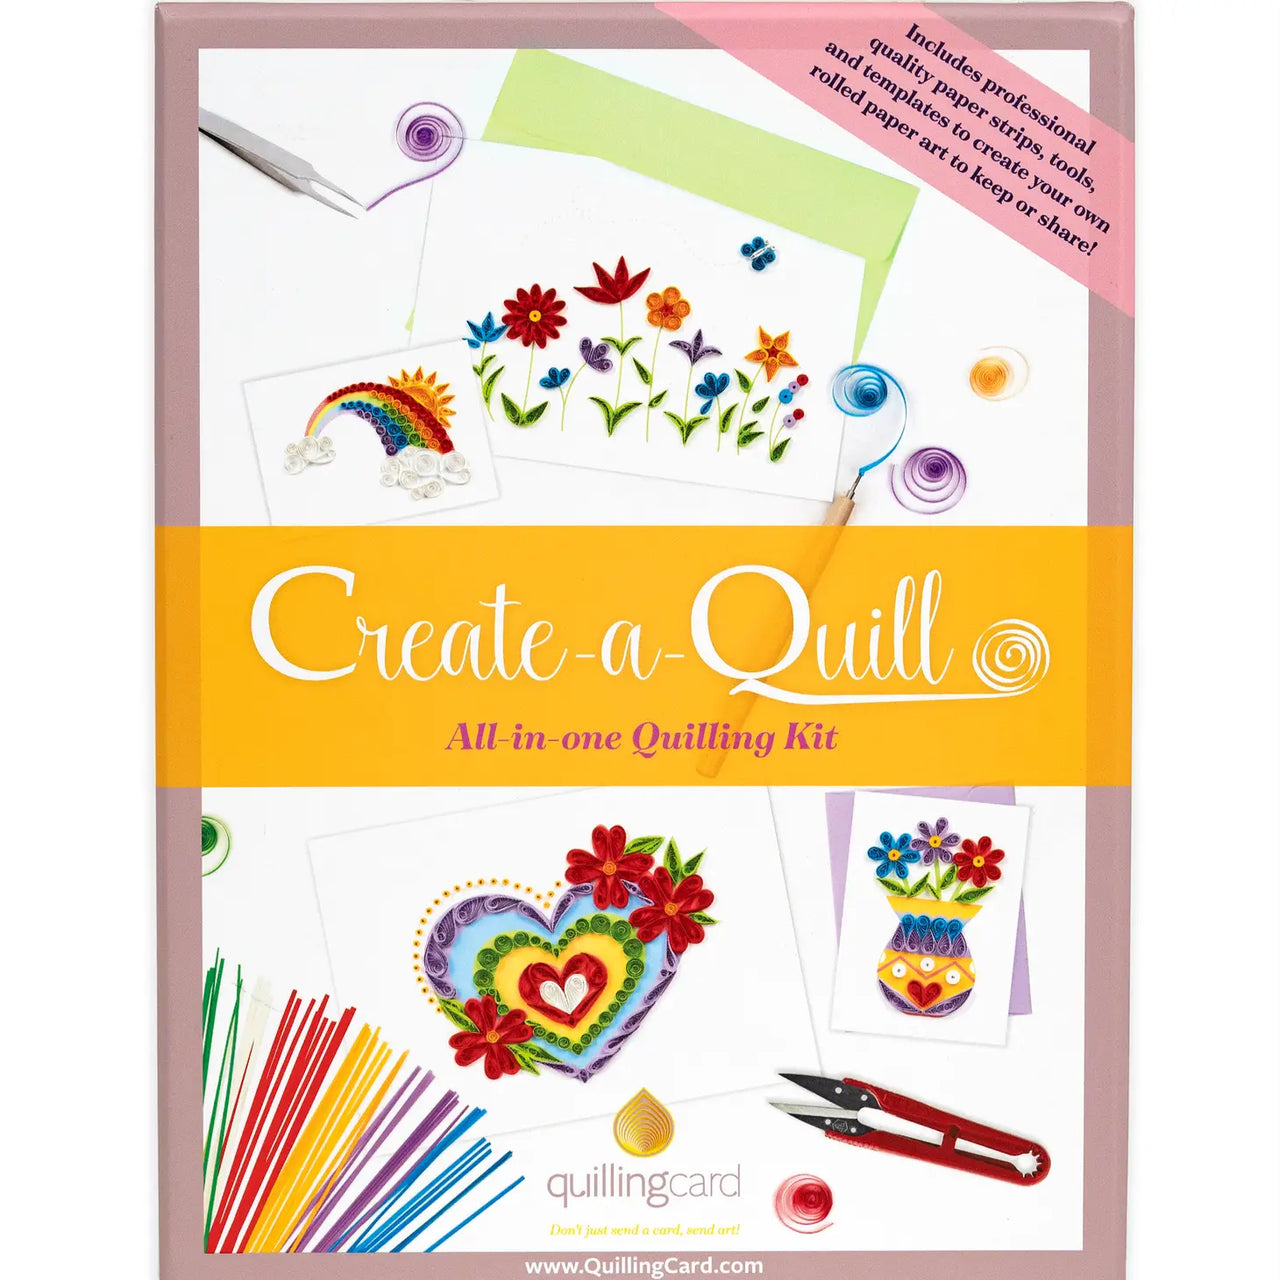 Quilling Card: Create-a-Quill DIY Kit, Everyday Designs